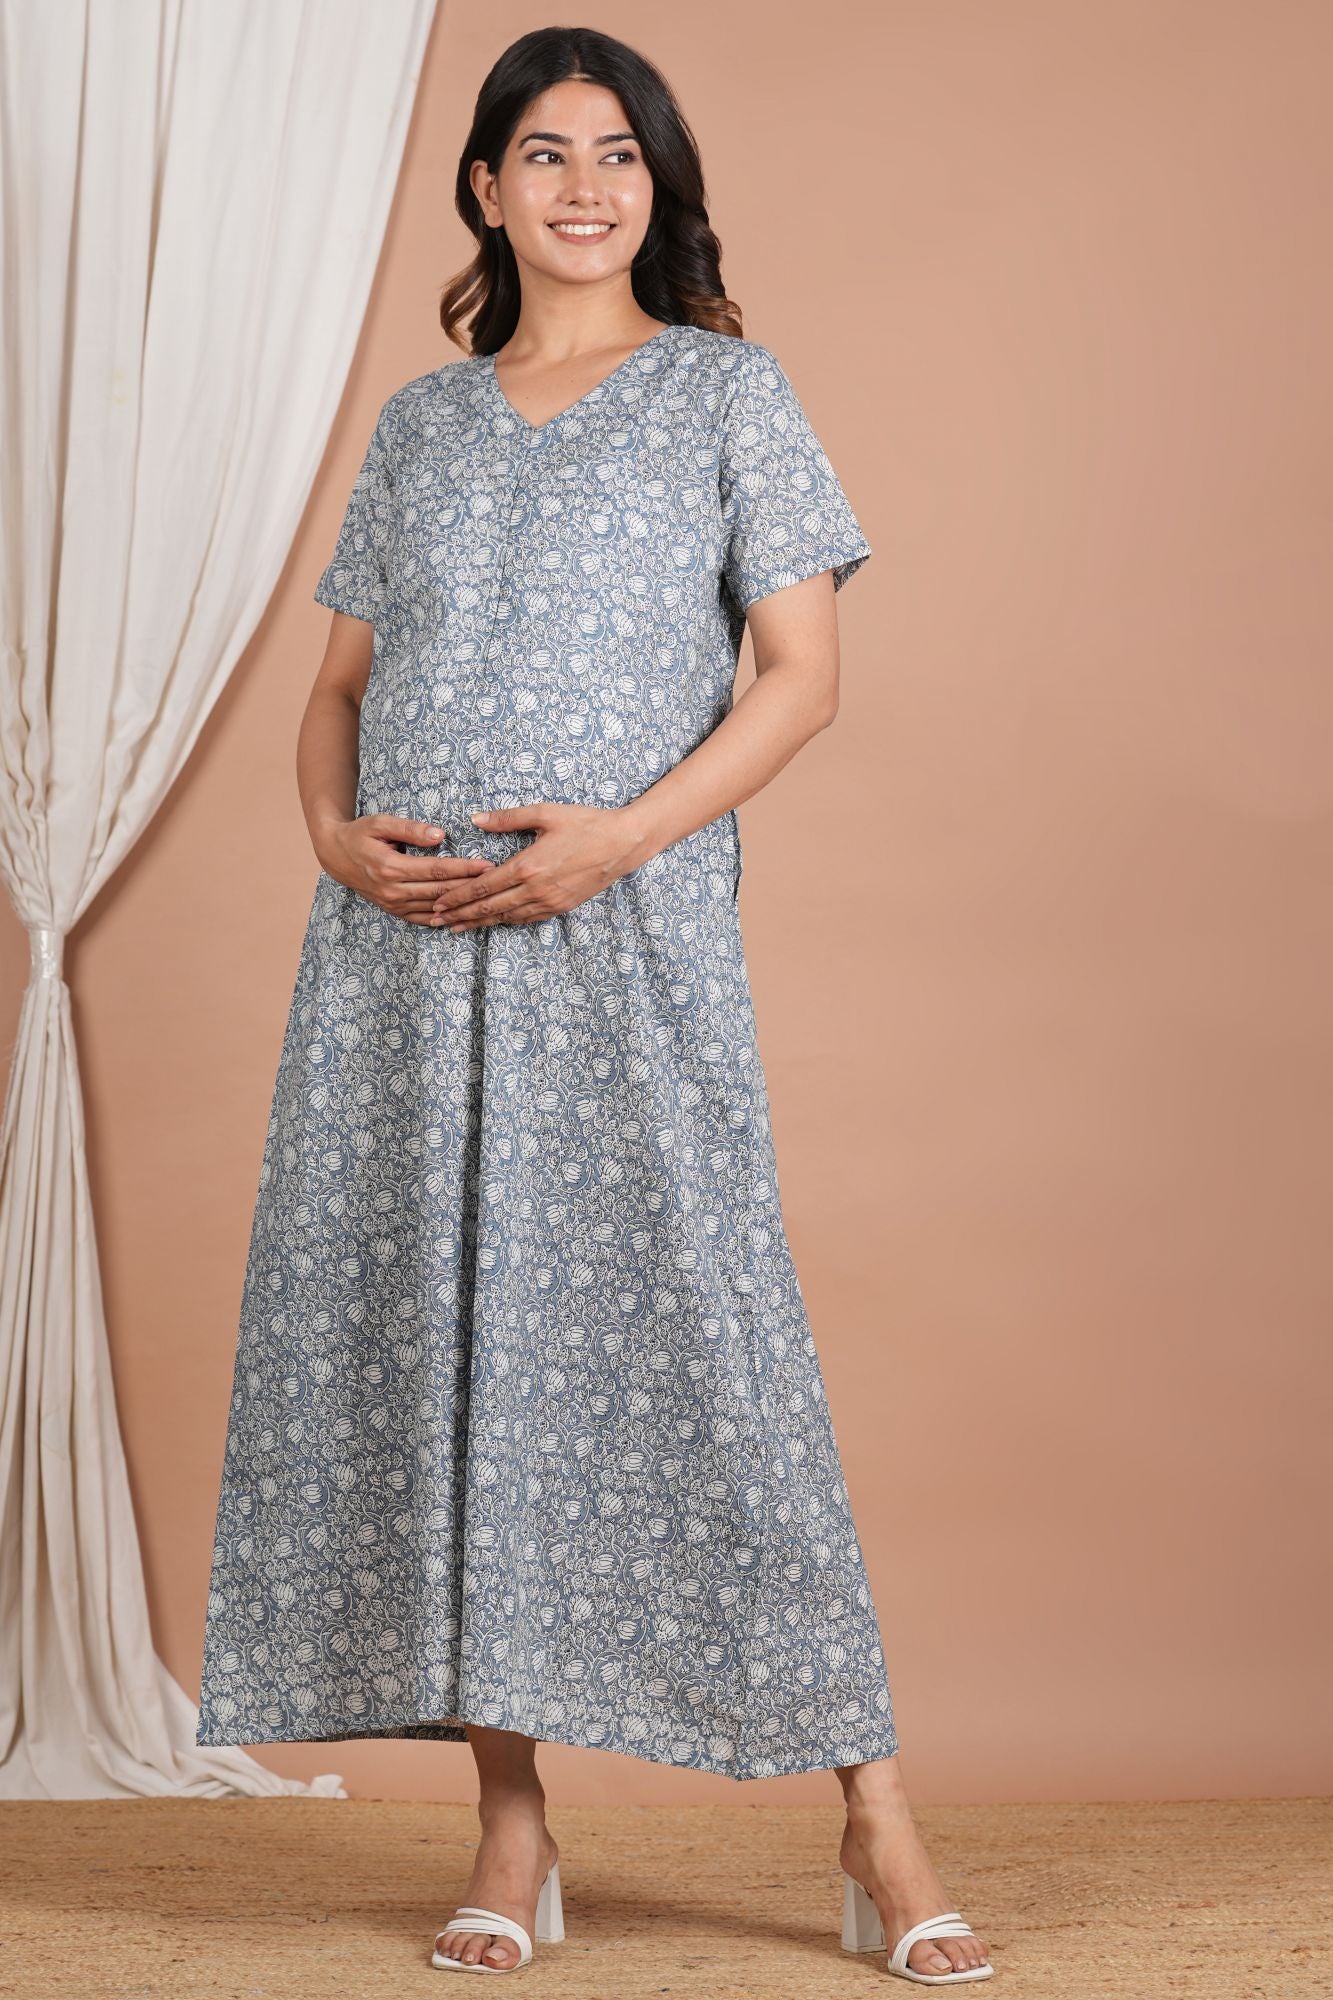 Classy Maternity Gown/Floral Maternity Gown/ Cotton Maternity Gown/  Maternity Wear